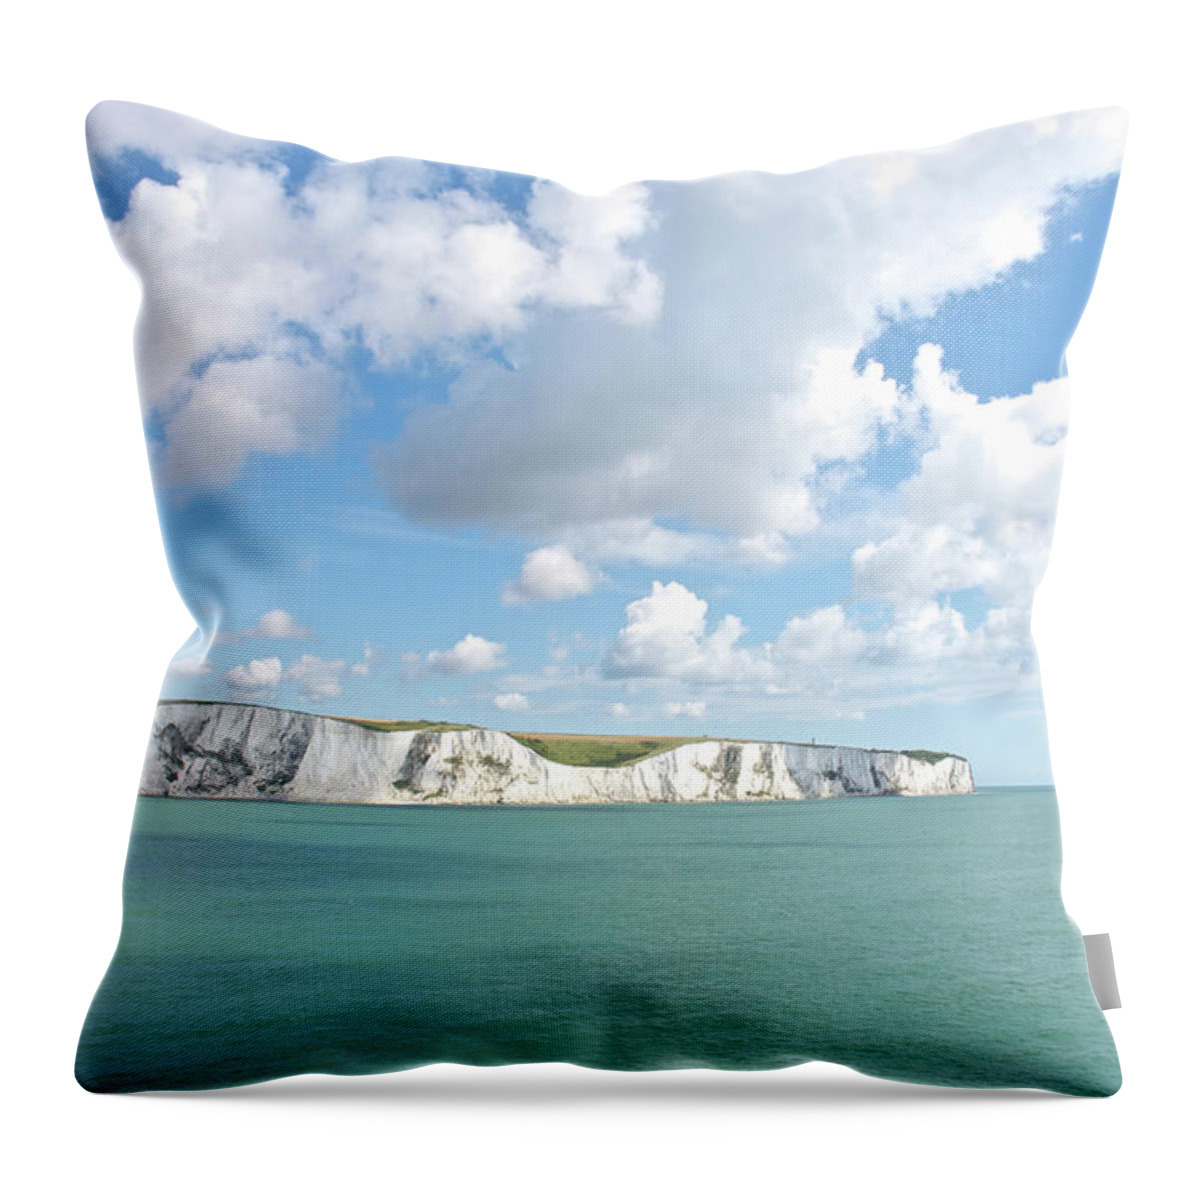 Water's Edge Throw Pillow featuring the photograph White Cliffs Of Dover #1 by Lisavalder